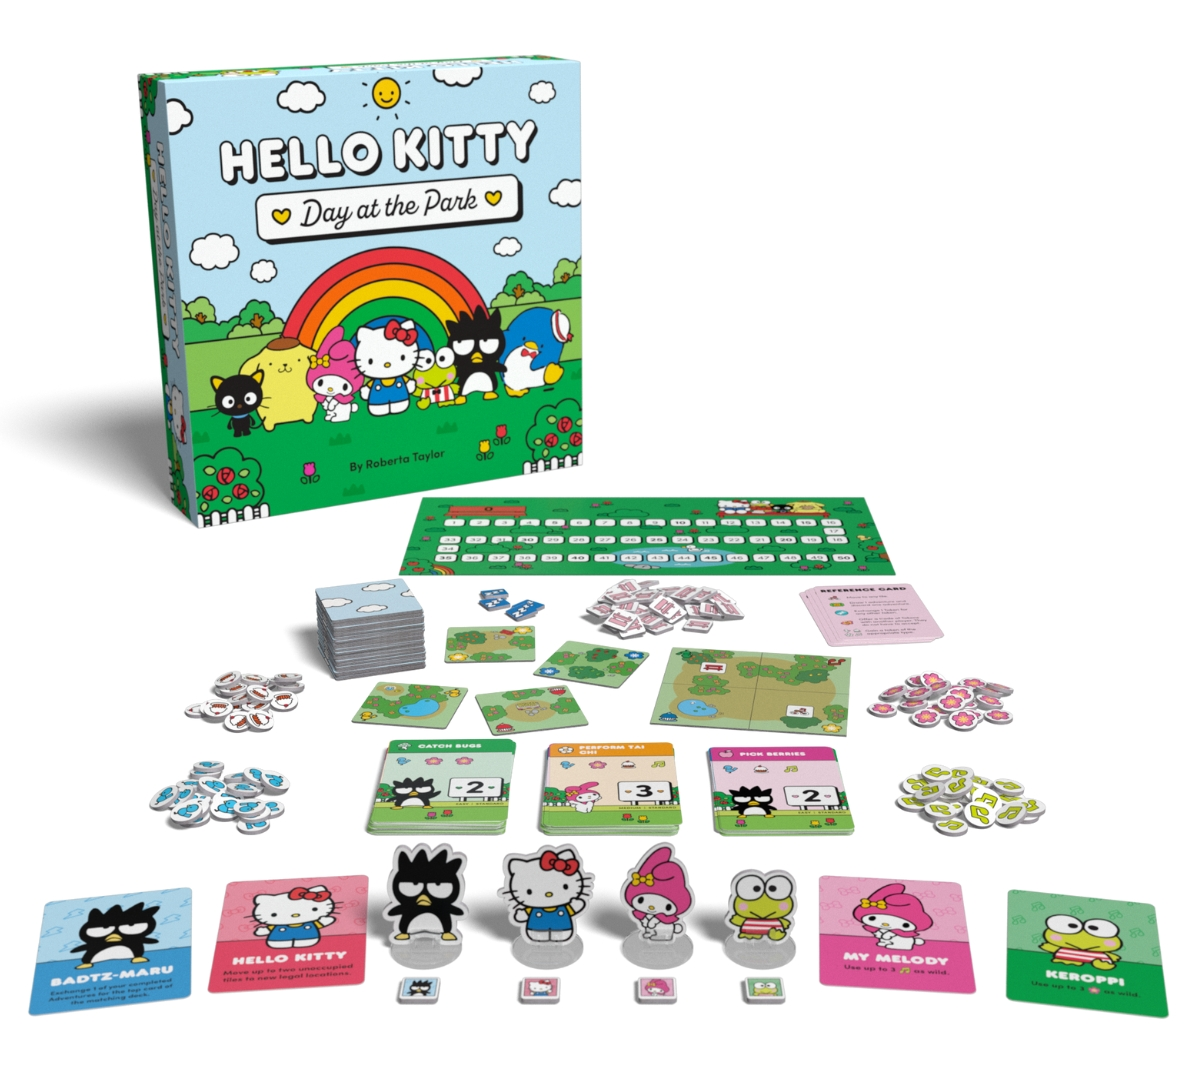 Hello Kitty: Day At the Park components